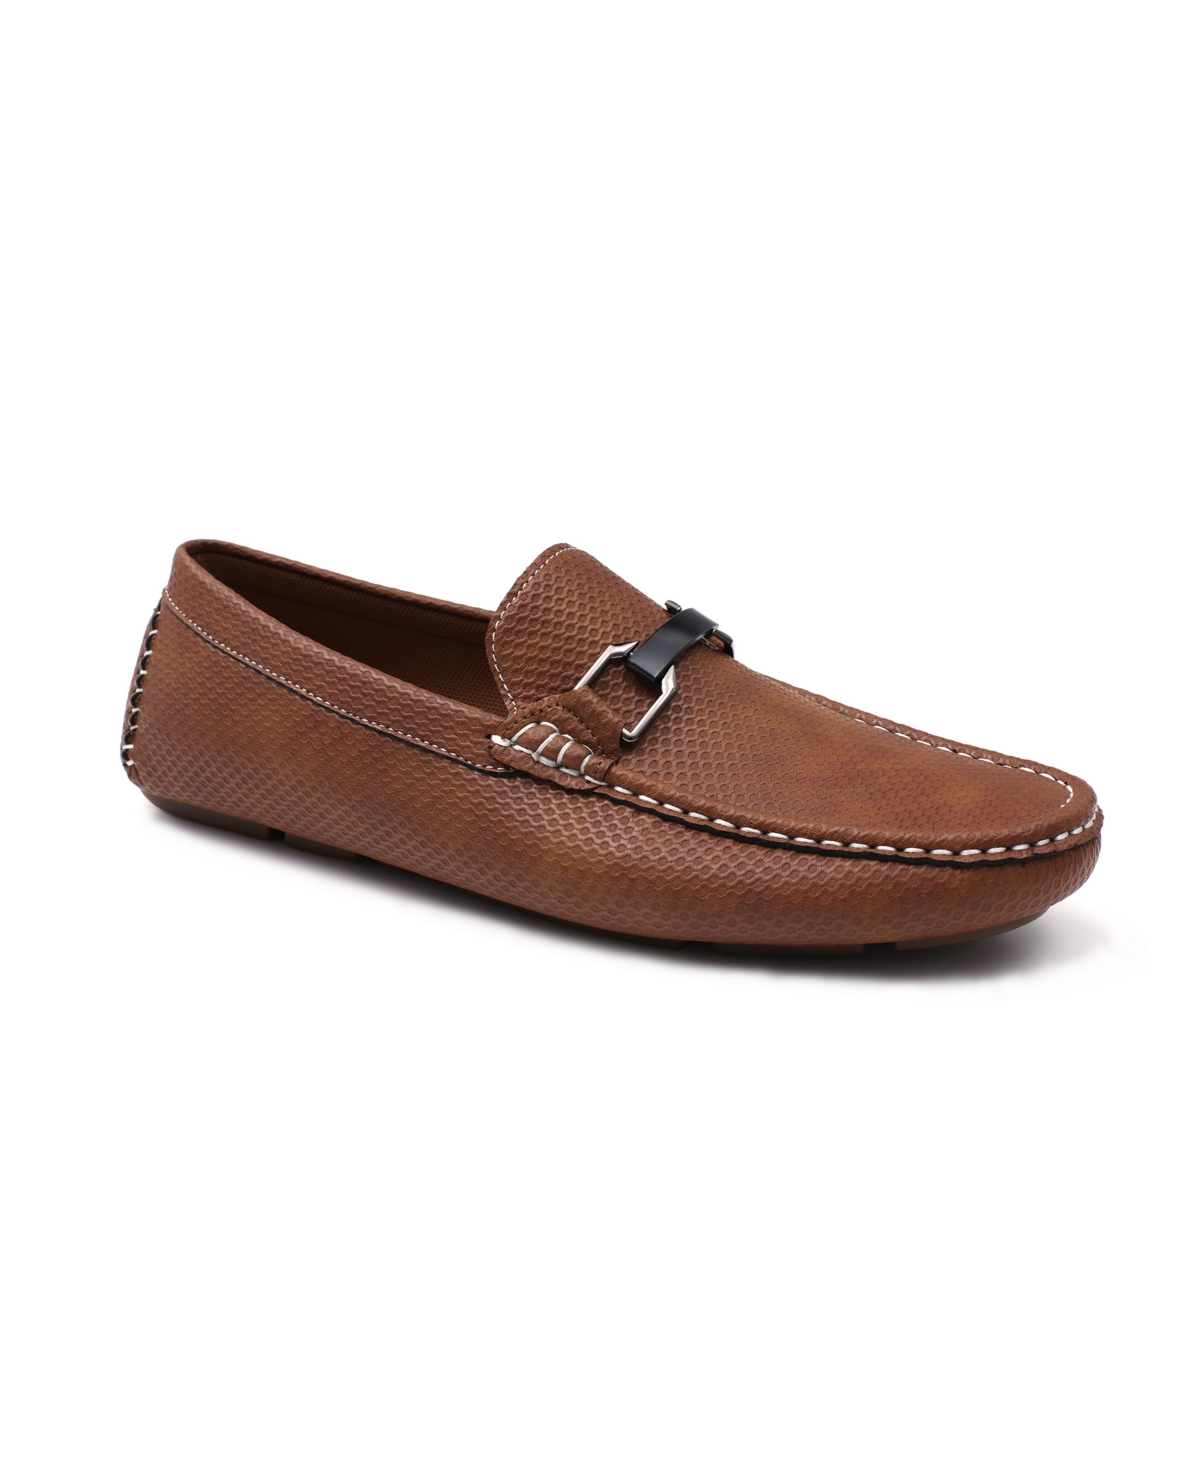 Men's Charter Driving Loafers - Maroon